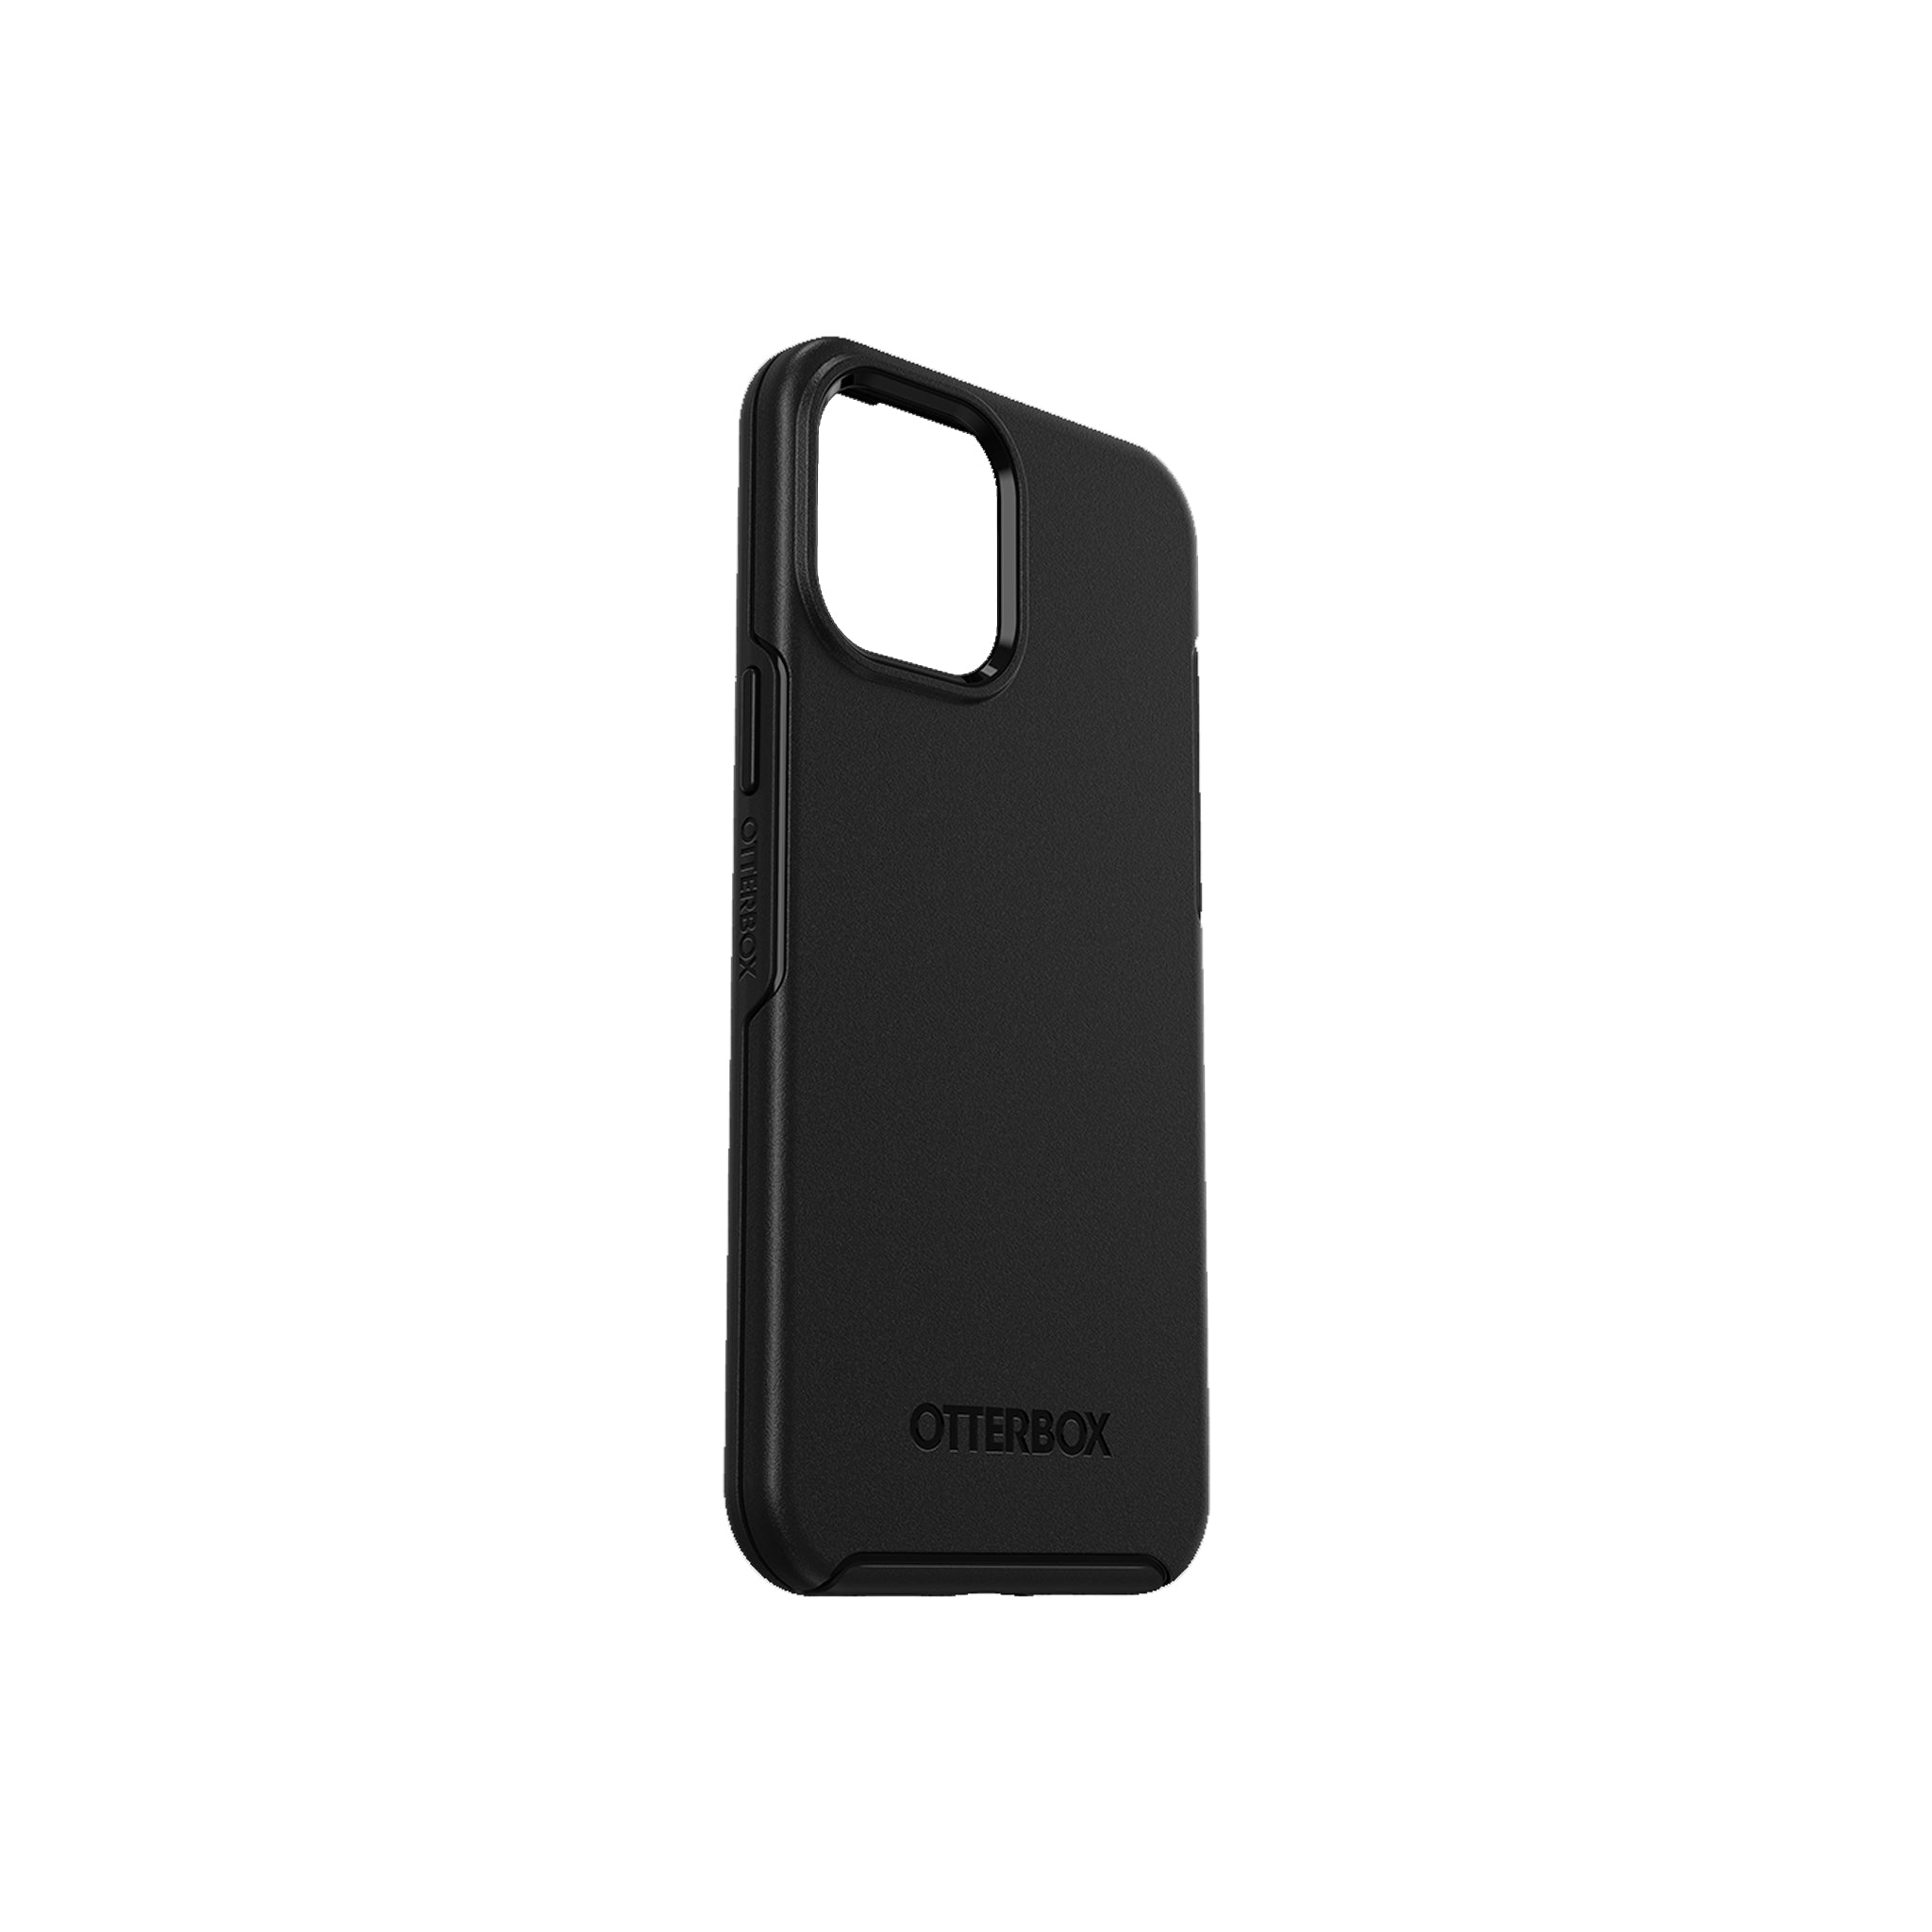 OtterBox - Symmetry for iPhone 12 Pro Max - Black